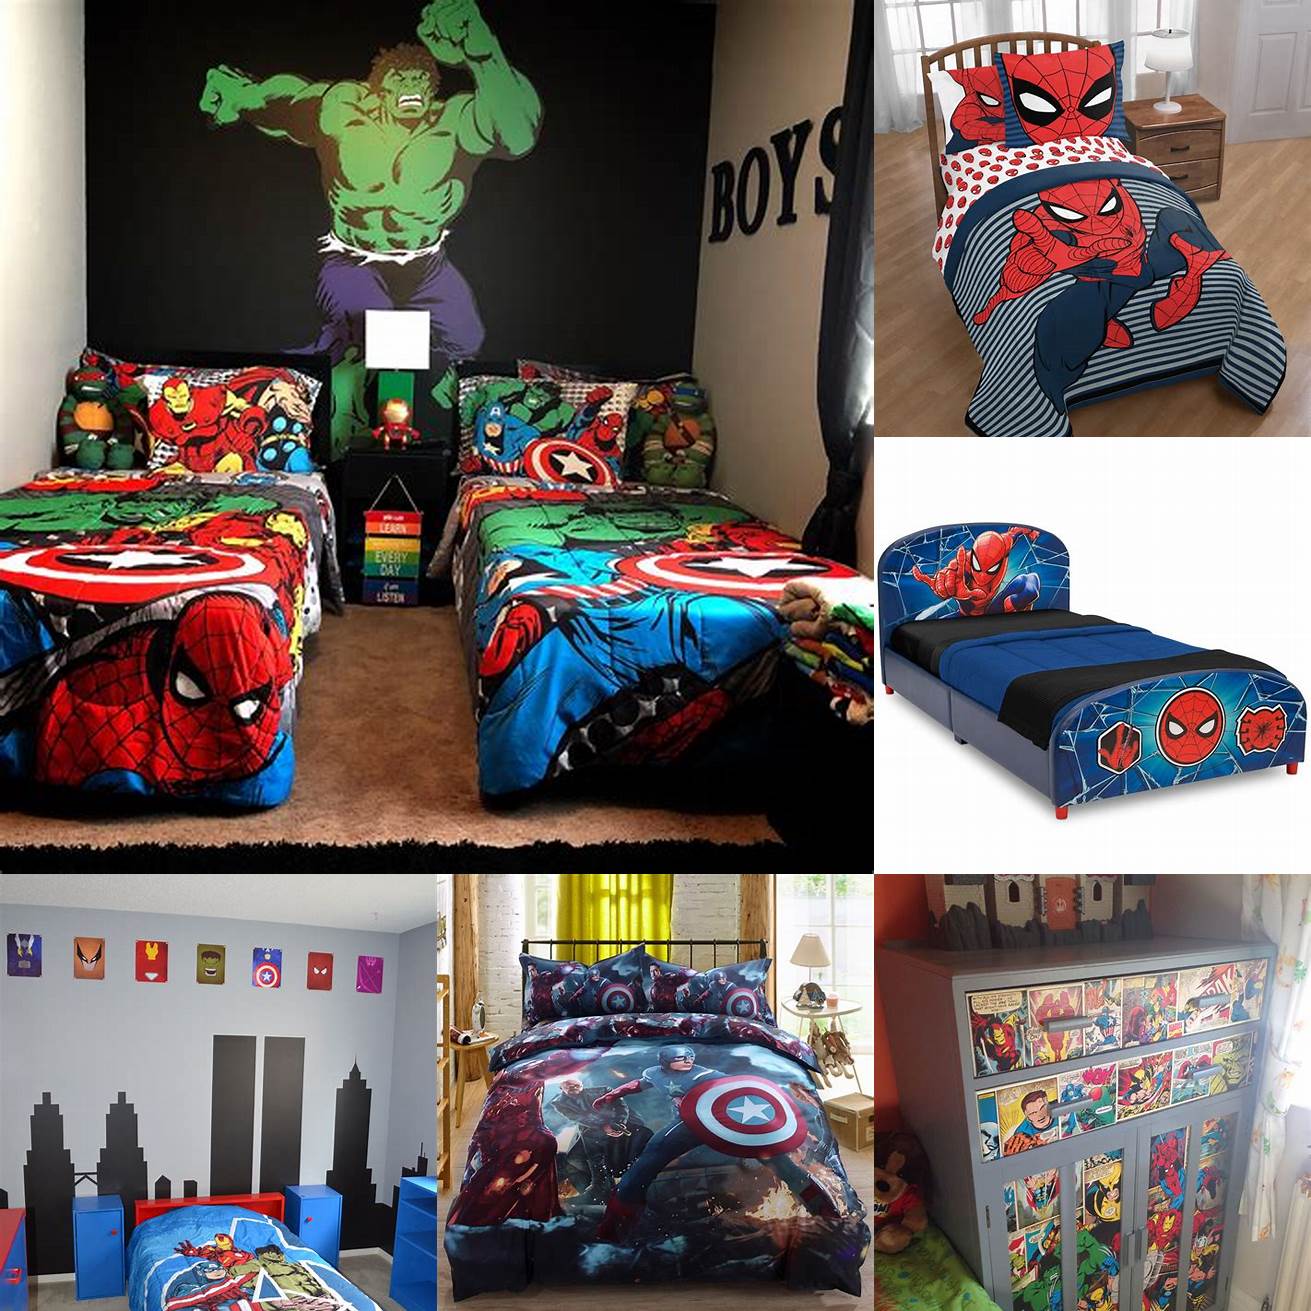 This superhero-themed set includes a twin bed frame nightstand and dresser perfect for a boy who loves comic books and action movies